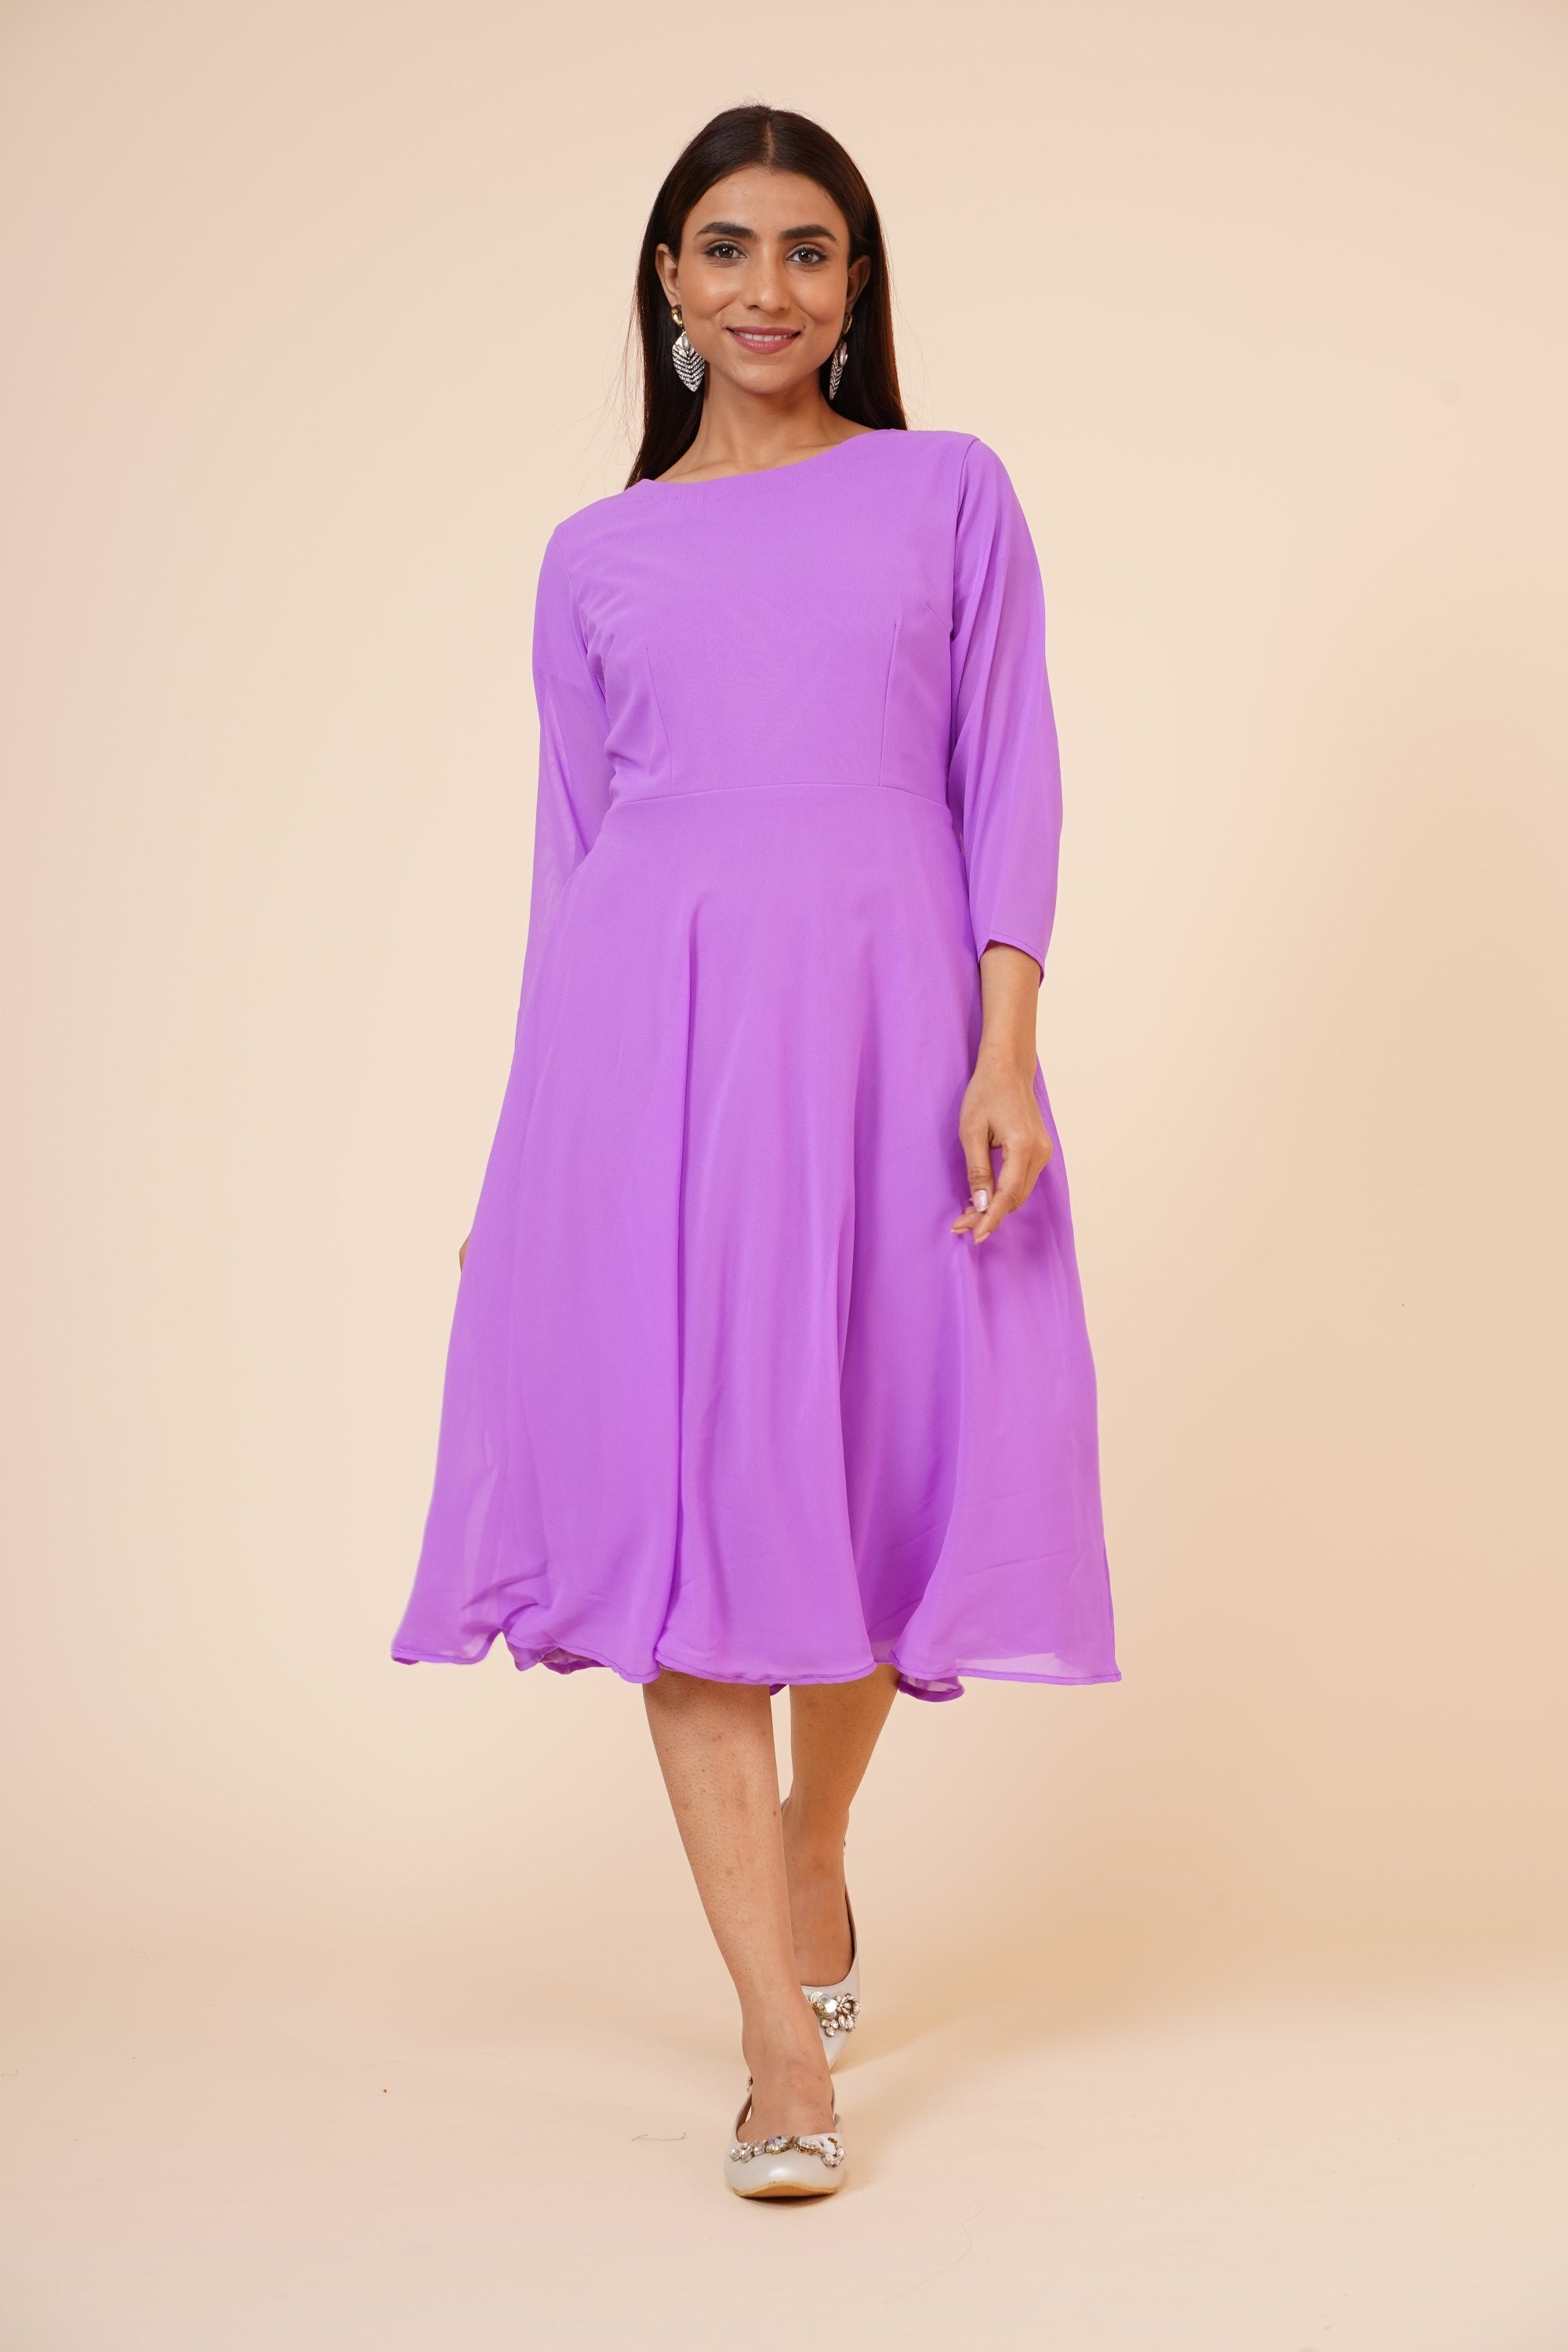 Women's Round Neck Georgette Party/ Casual Dress In Mauve - MIRACOLOS by Ruchi